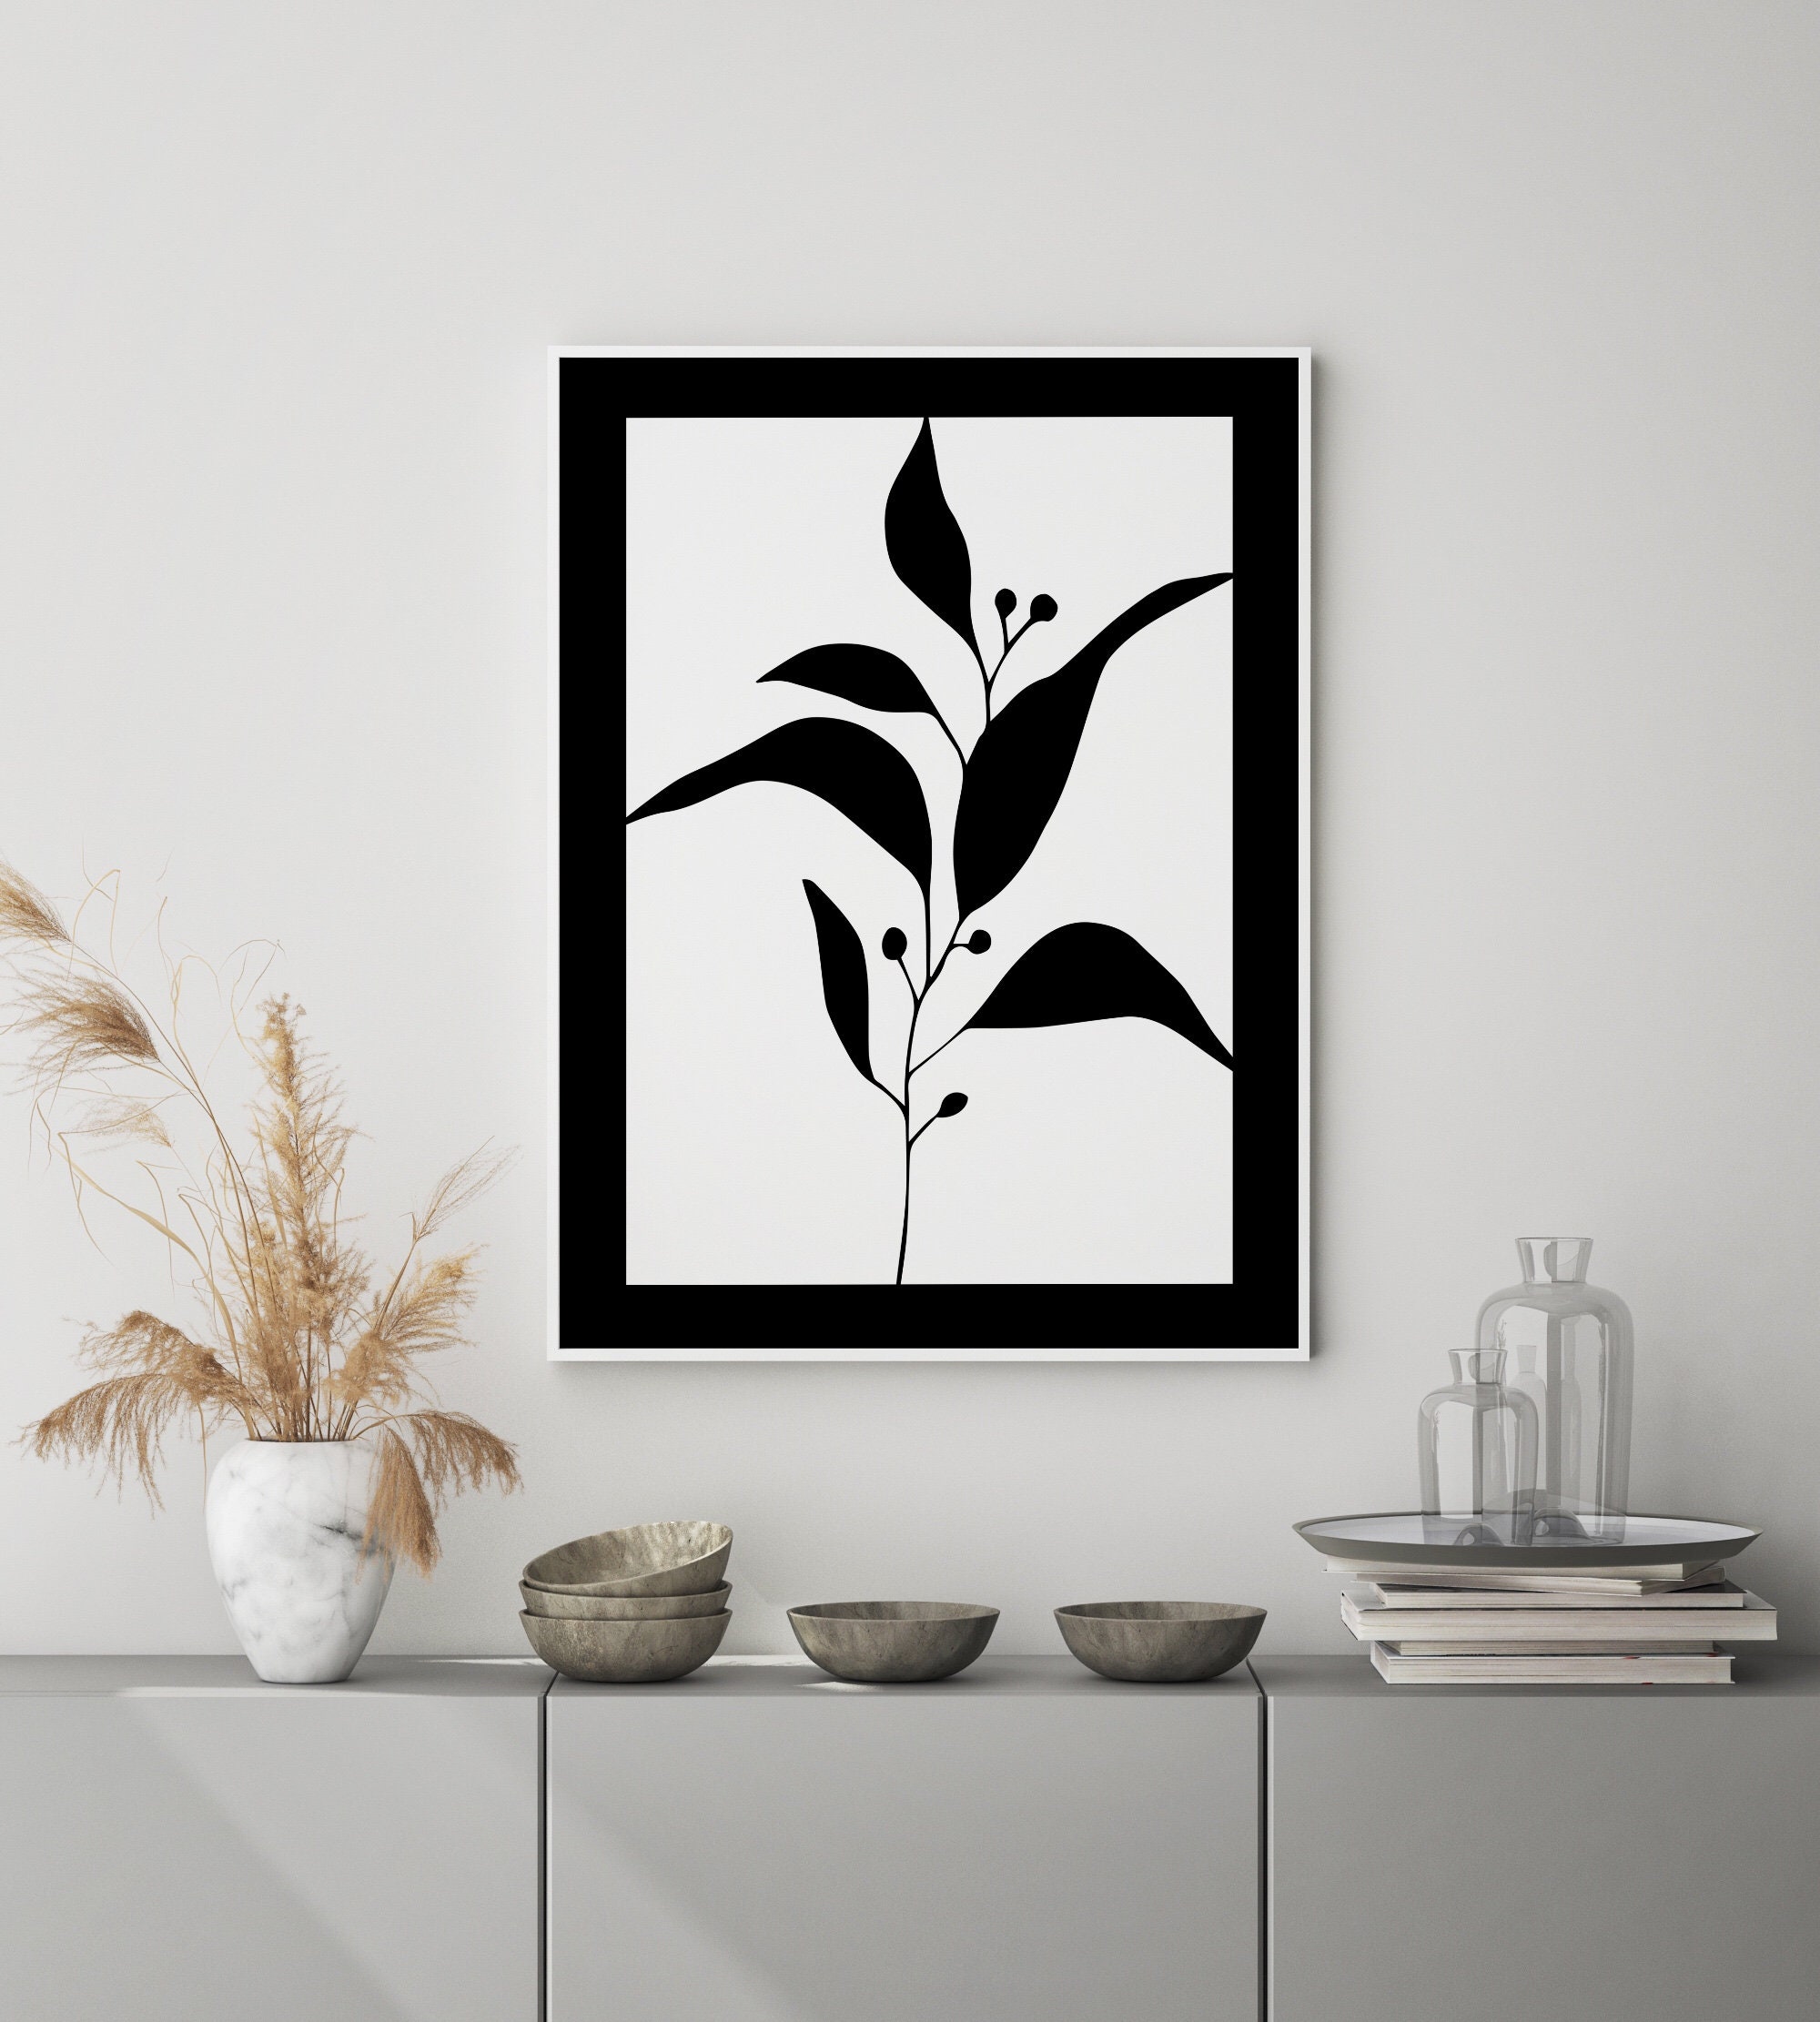 Set of 3 Botanical Silhouette Wall Prints Abstract Leaf Art | Etsy